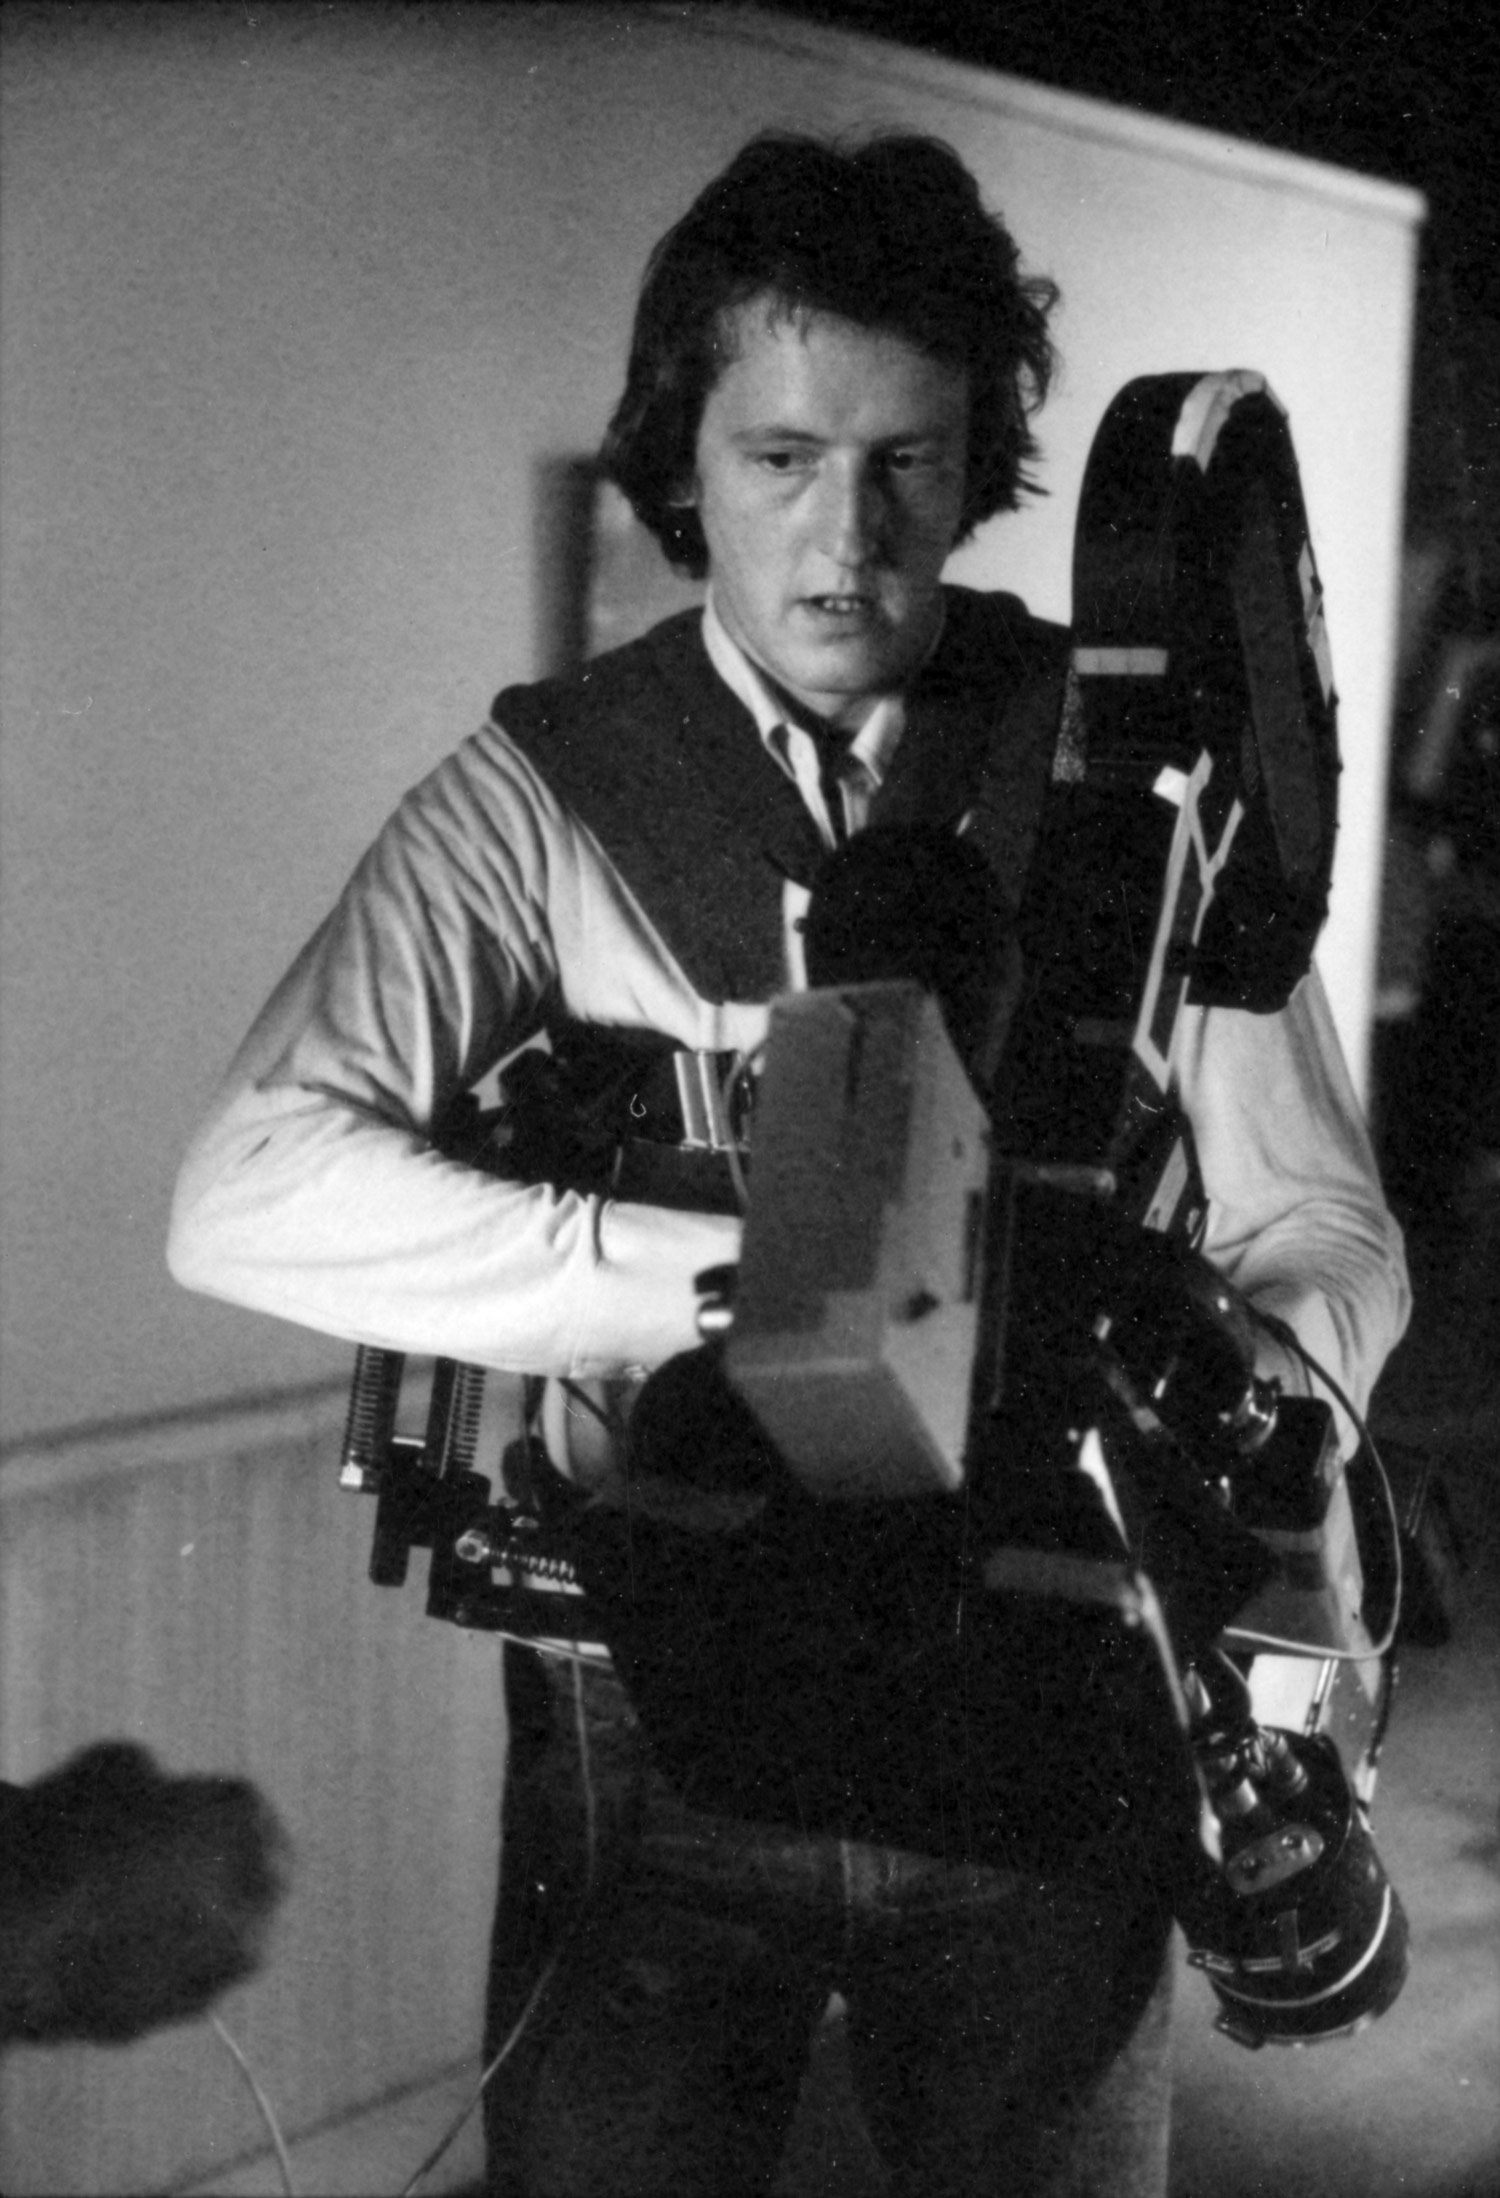  Steadicam operator Garrett Brown during the production of <i>Bound for Glory</i> (USA, 1976). Metro-Goldwyn-Mayer/UA photographs, Margaret Herrick Library, Academy of Motion Picture Arts and Sciences.
 